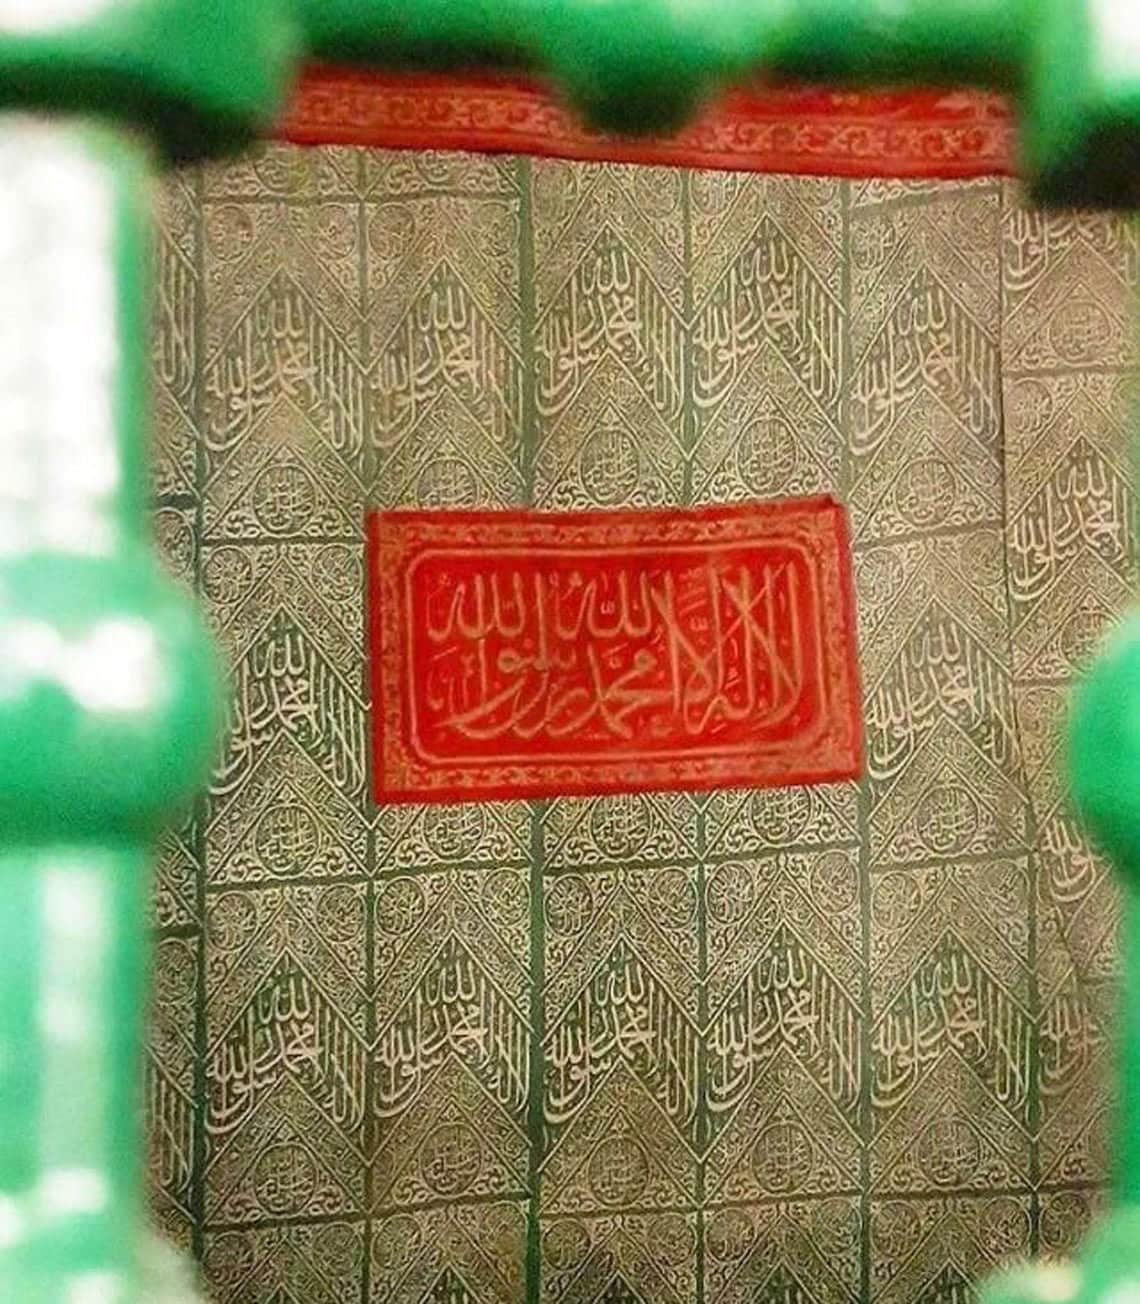 Prophet Islam Muhammed Nabi SAW Grave chamber Cloth / Islamic Gifts / Mosque Masjid Islam Decoration / Best Gift For Muslim Friend Family